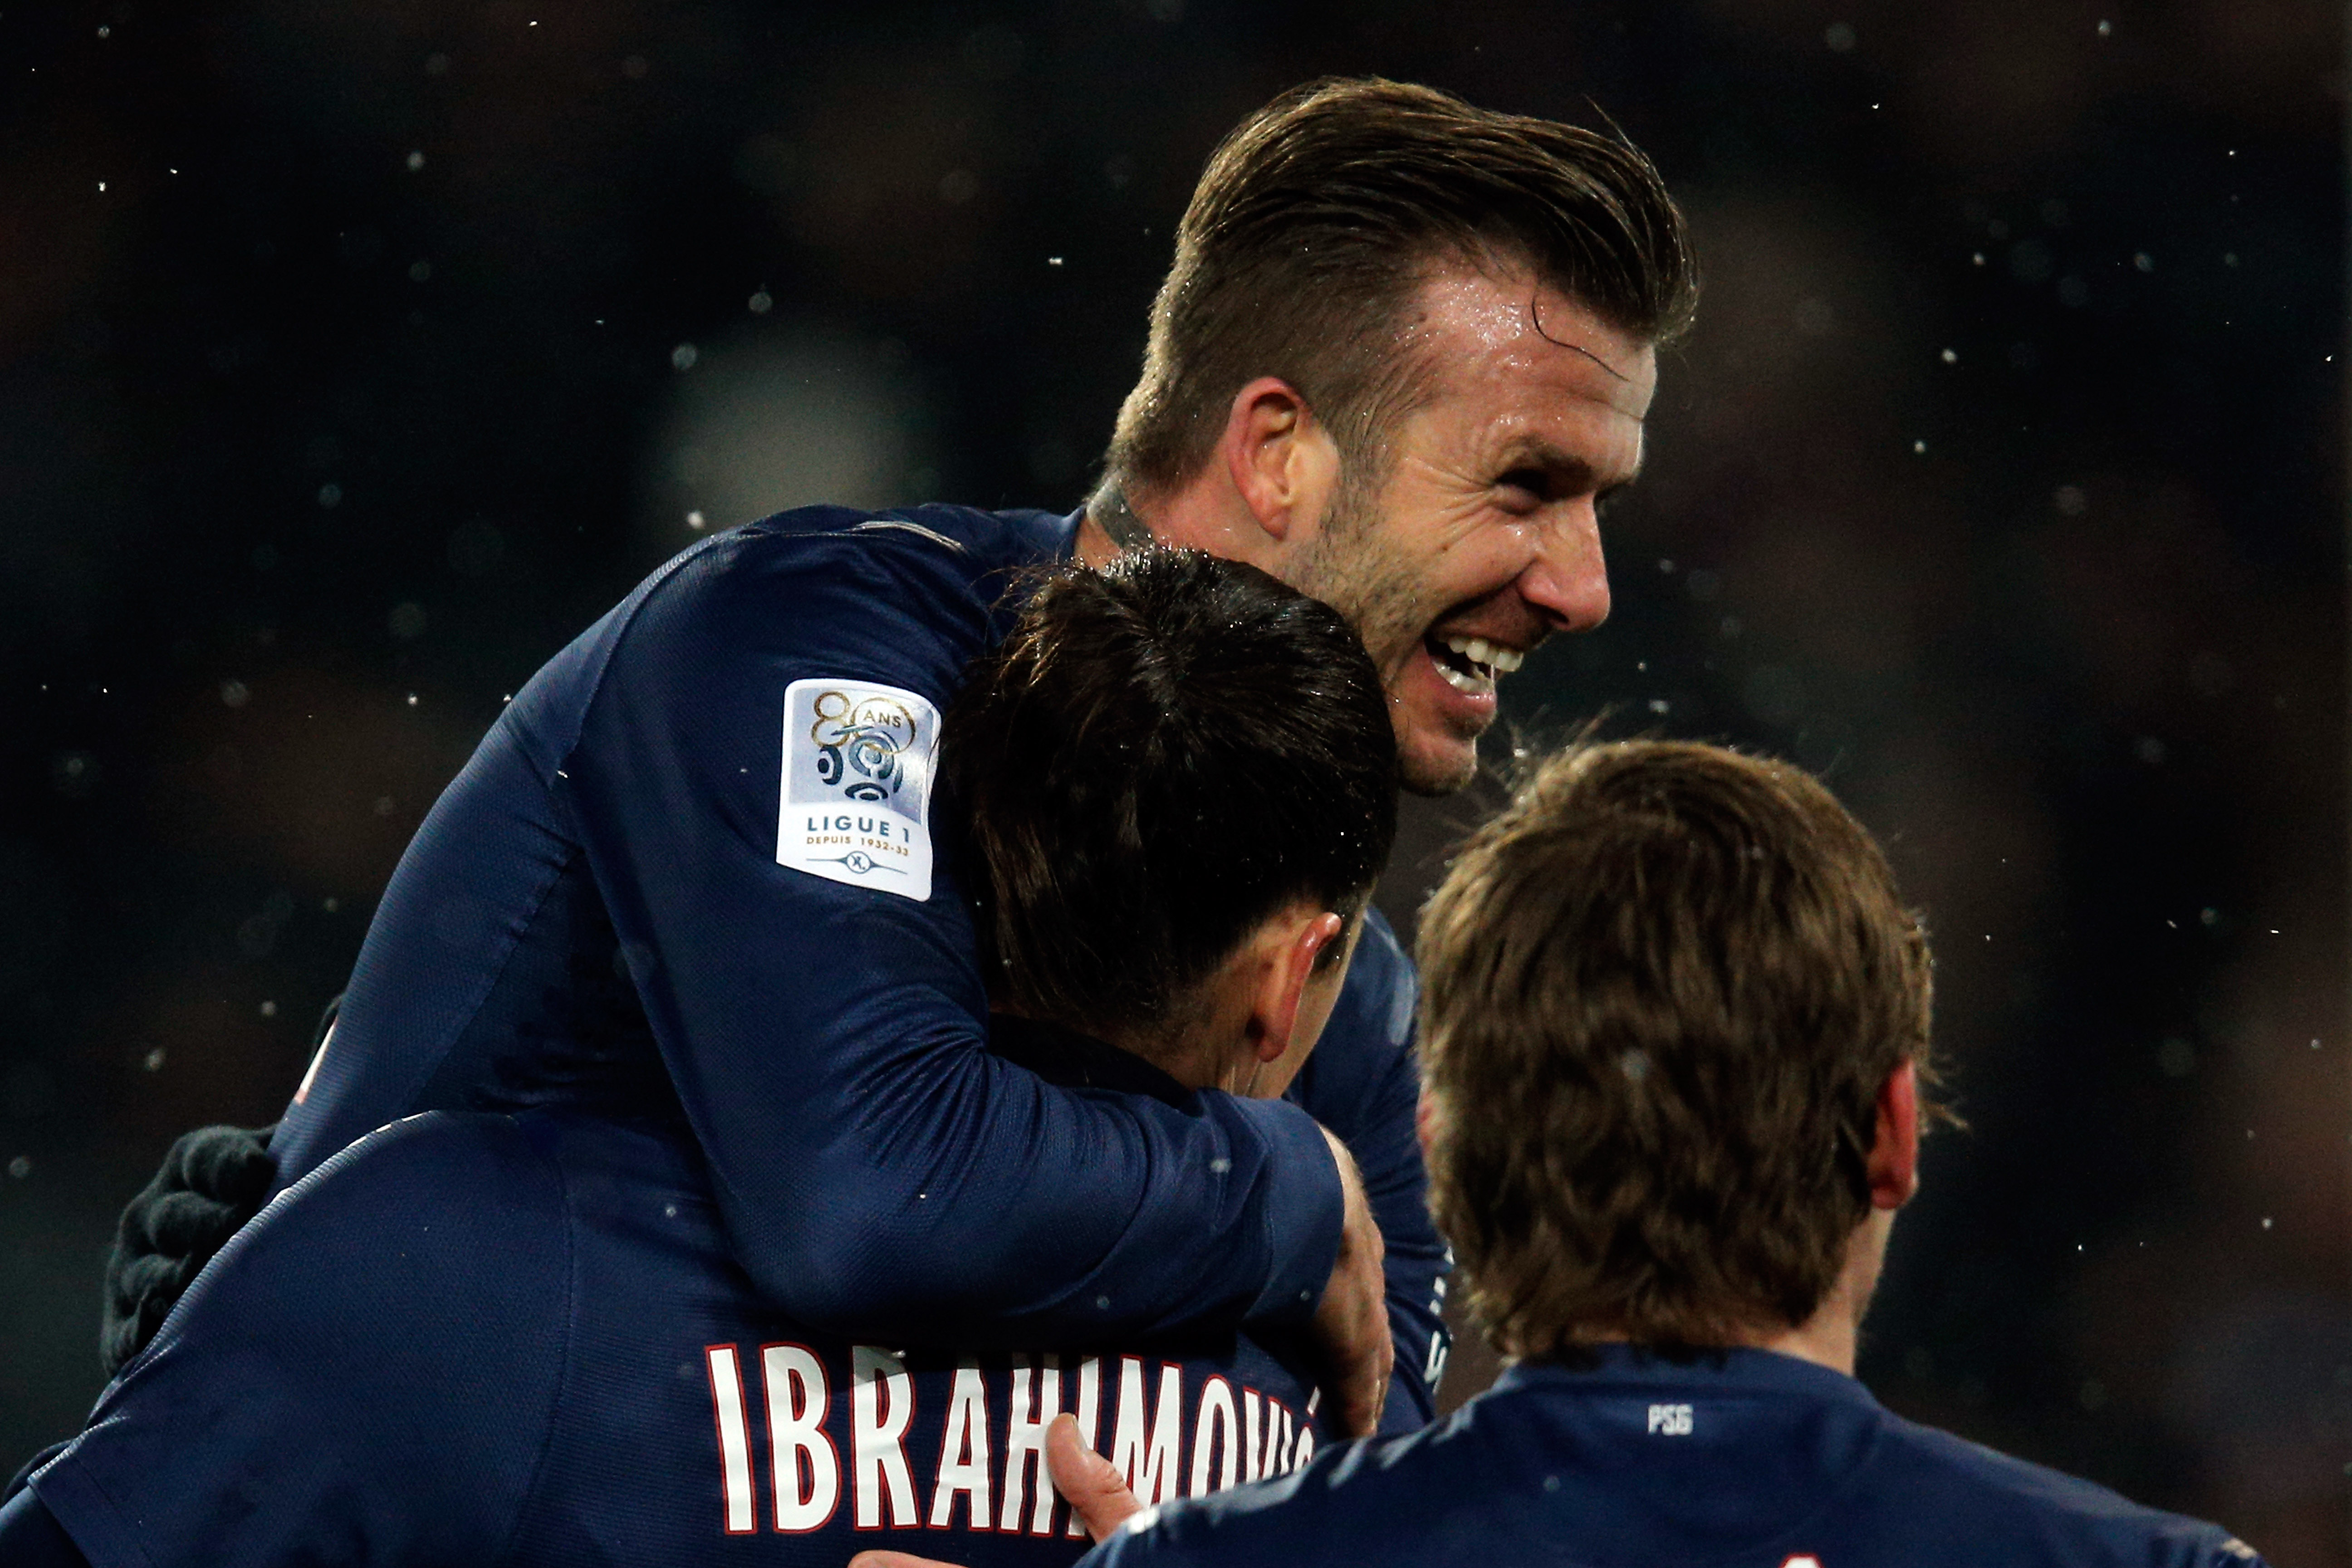 PARIS, FRANCE - FEBRUARY 24: David Beckham of PSG jumps on the goal scorer and team mate Zlatan Ibrahimovic during the Ligue 1 match between Paris Saint-Germain FC and Olympique de Marseille at Parc des Princes on February 24, 2013 in Paris, France. (Photo by Dean Mouhtaropoulos/Getty Images)